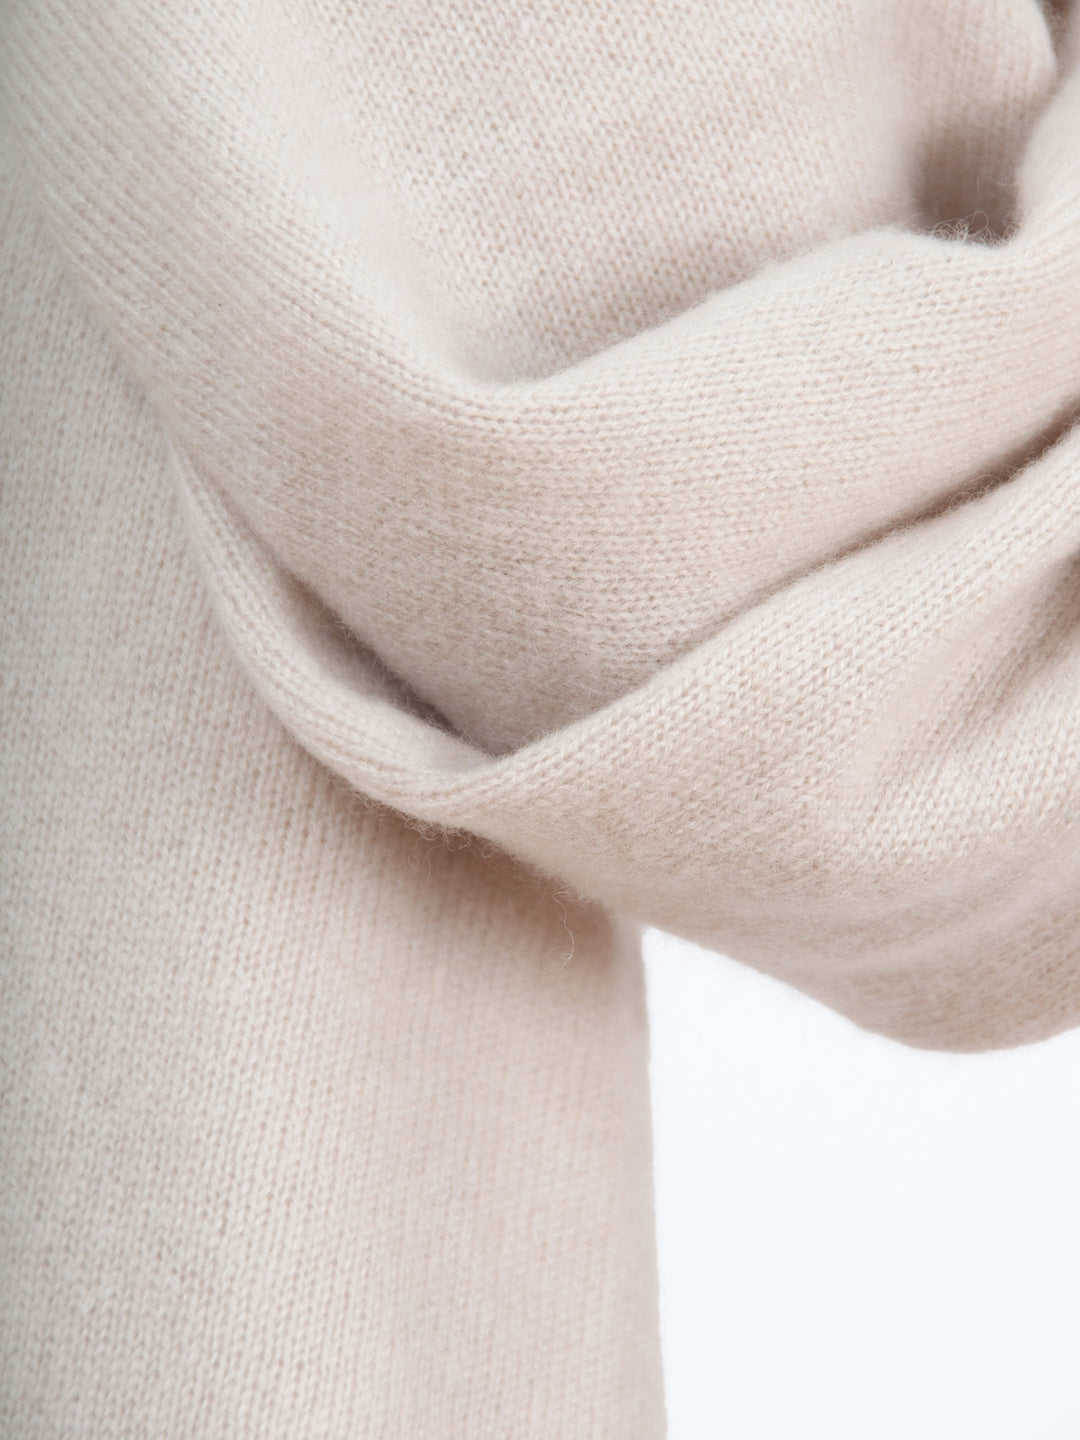 Cashmere scarf "Signature" in 100% cashmere from Kashmina, pearl color